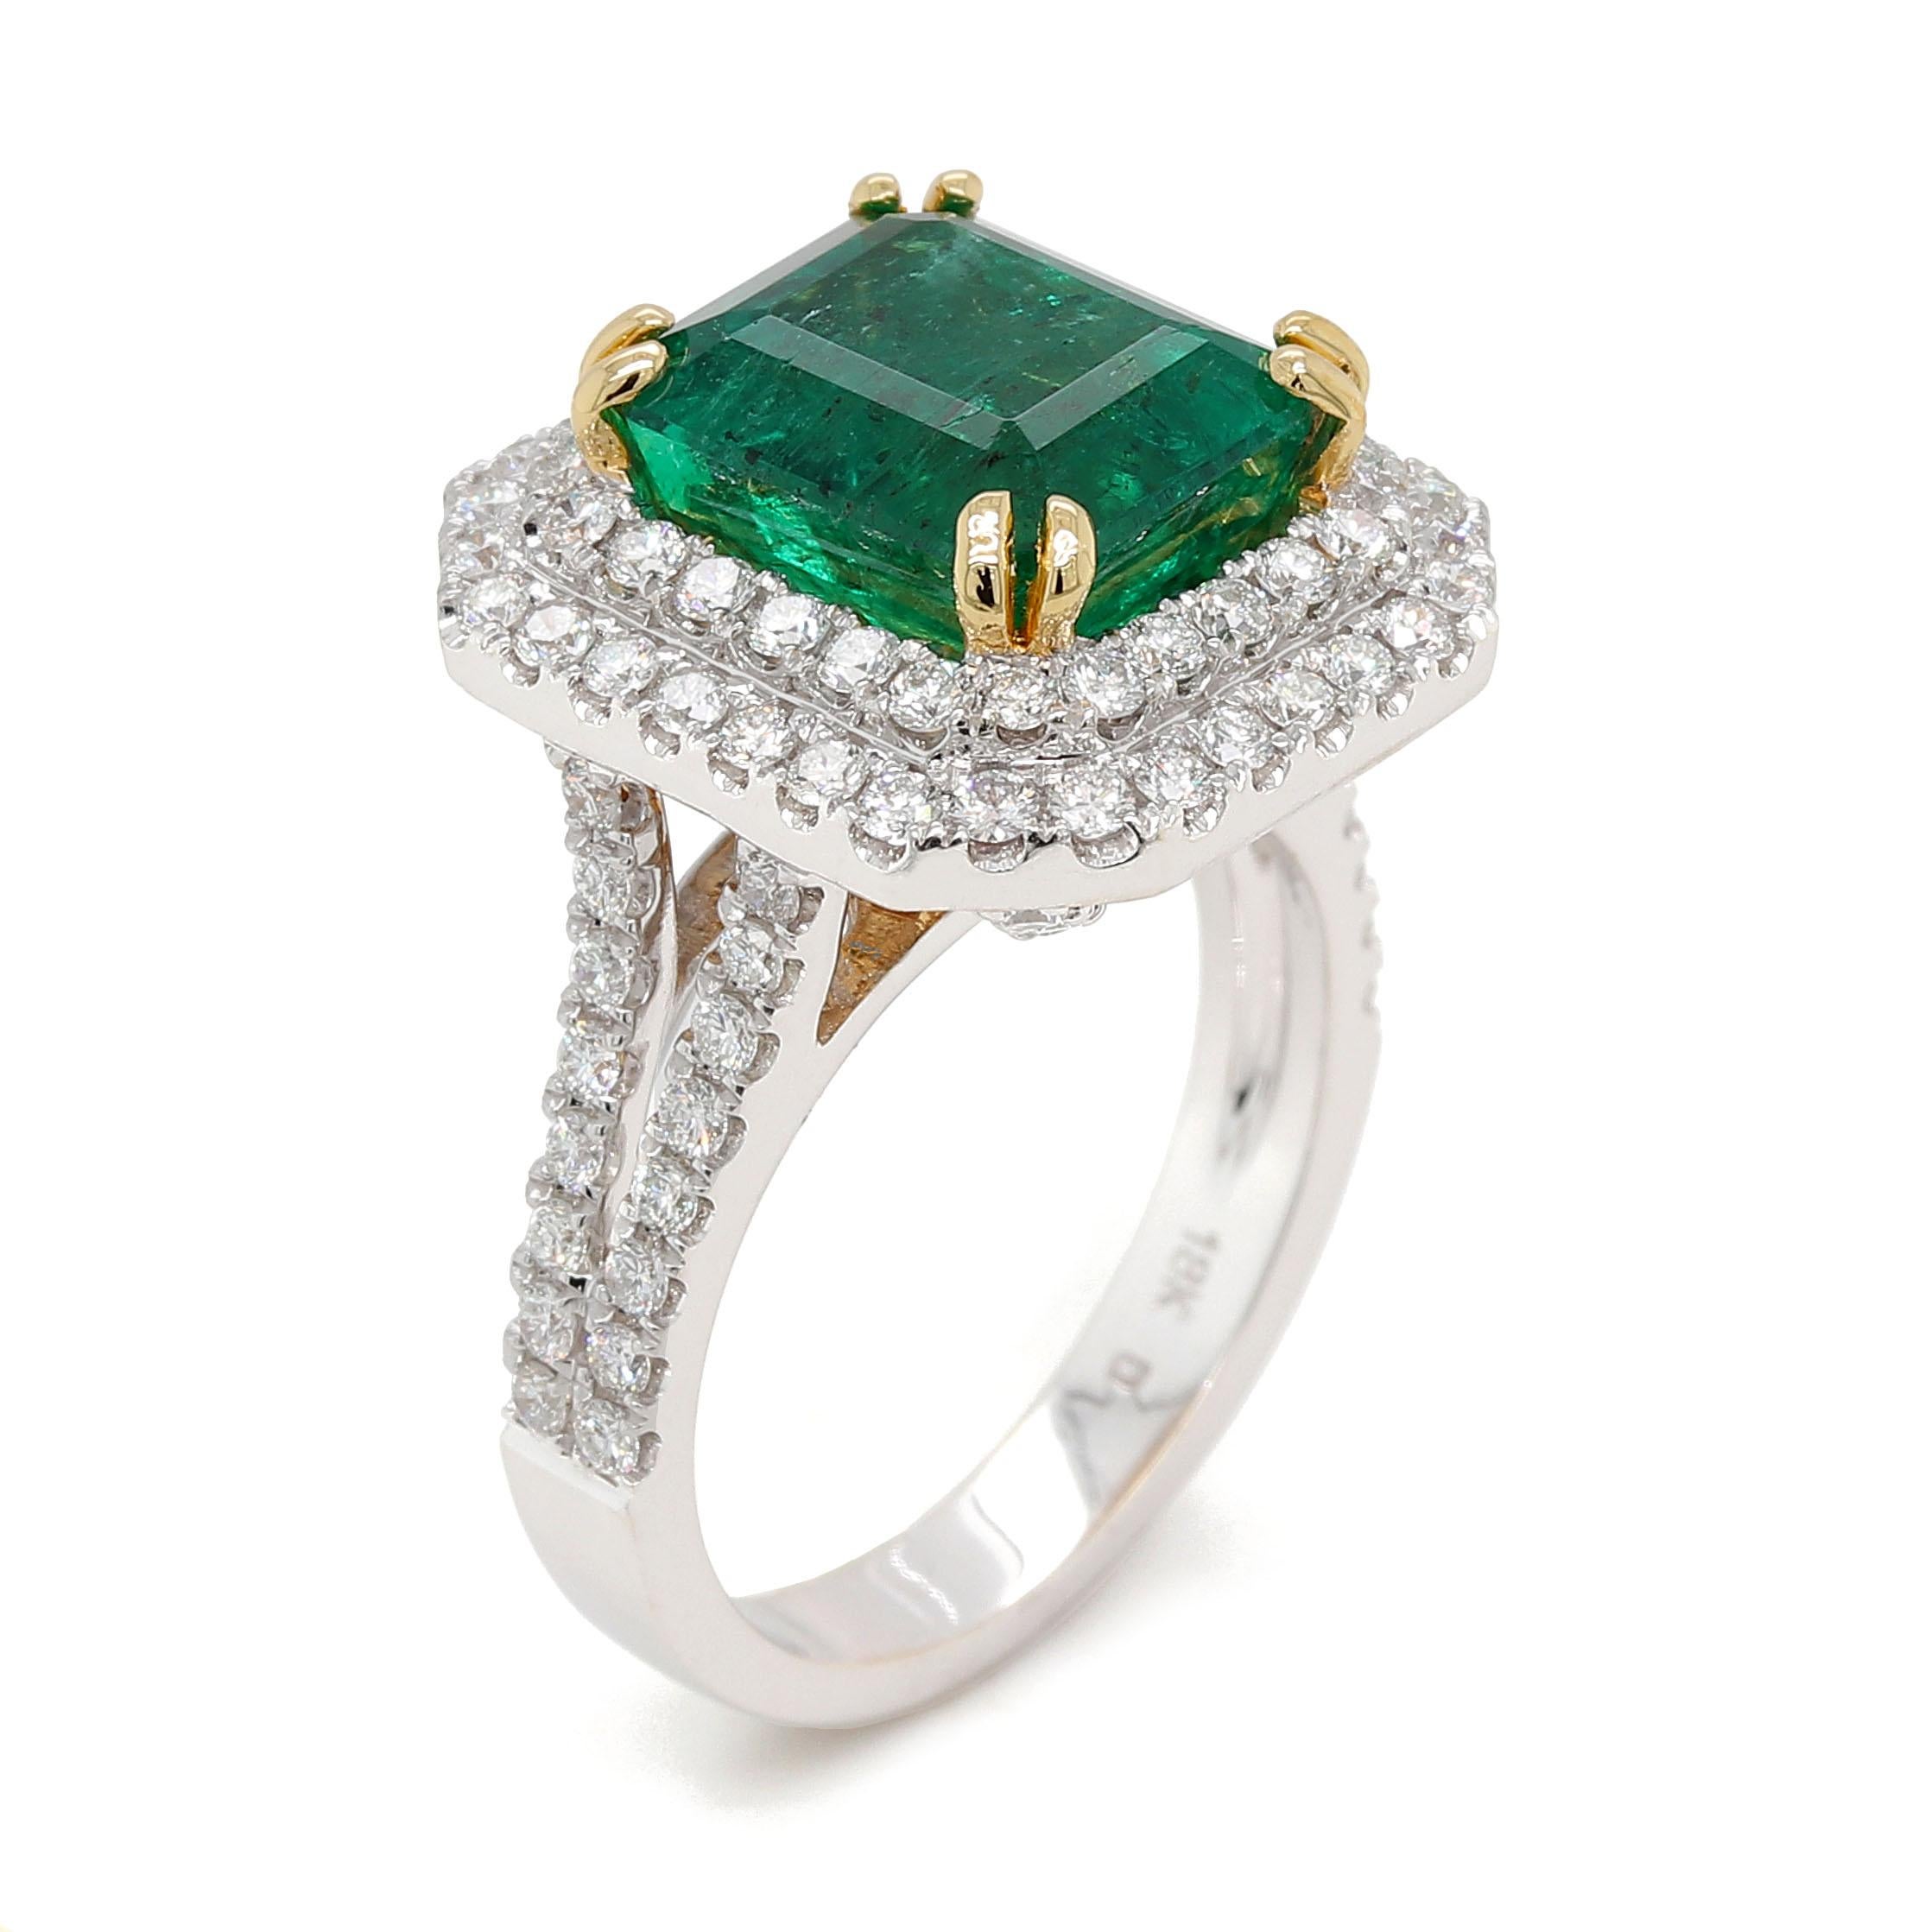 Ring with a fine octagonal cut Emerald of about 4.76 carats measuring 10.16×8.901×6.95mm. The Origin of the Emerald is Zambia. The Emerald is surrounded by 106 round brilliant cut diamonds of about 1.29 carats with a clarity of VS and color G. All